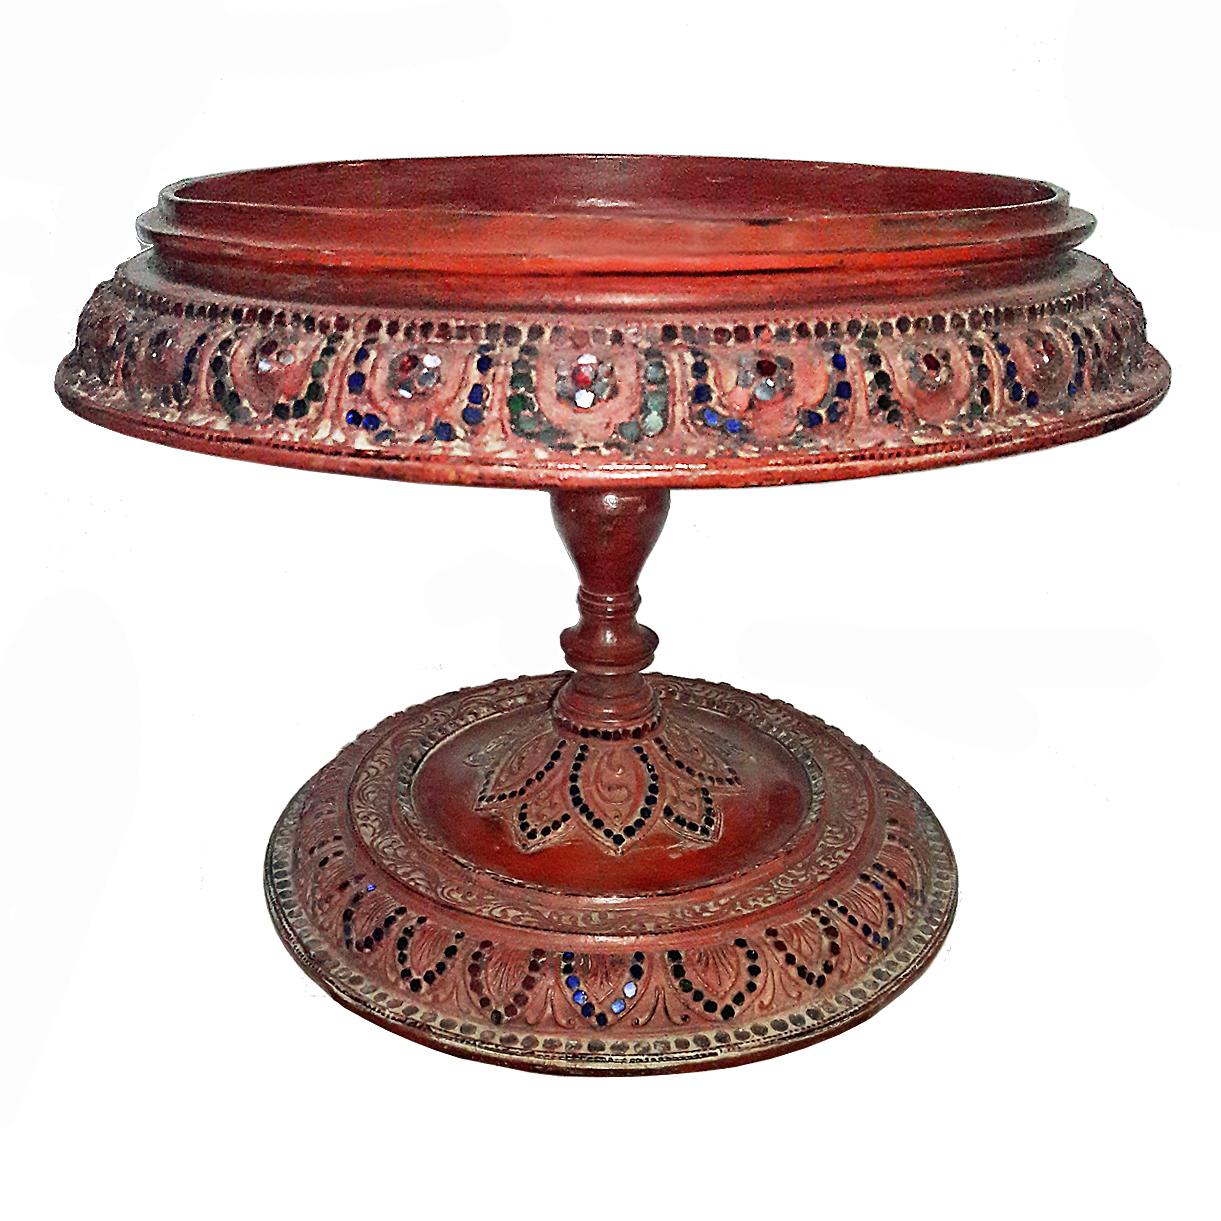 A small pedestal tray or table hand carved in Thailand, circa 1920. Red and black lacquer, with mirror and colored stone insets. A beautiful decorative accent for any dinner table, console, kitchen counter or any other room.